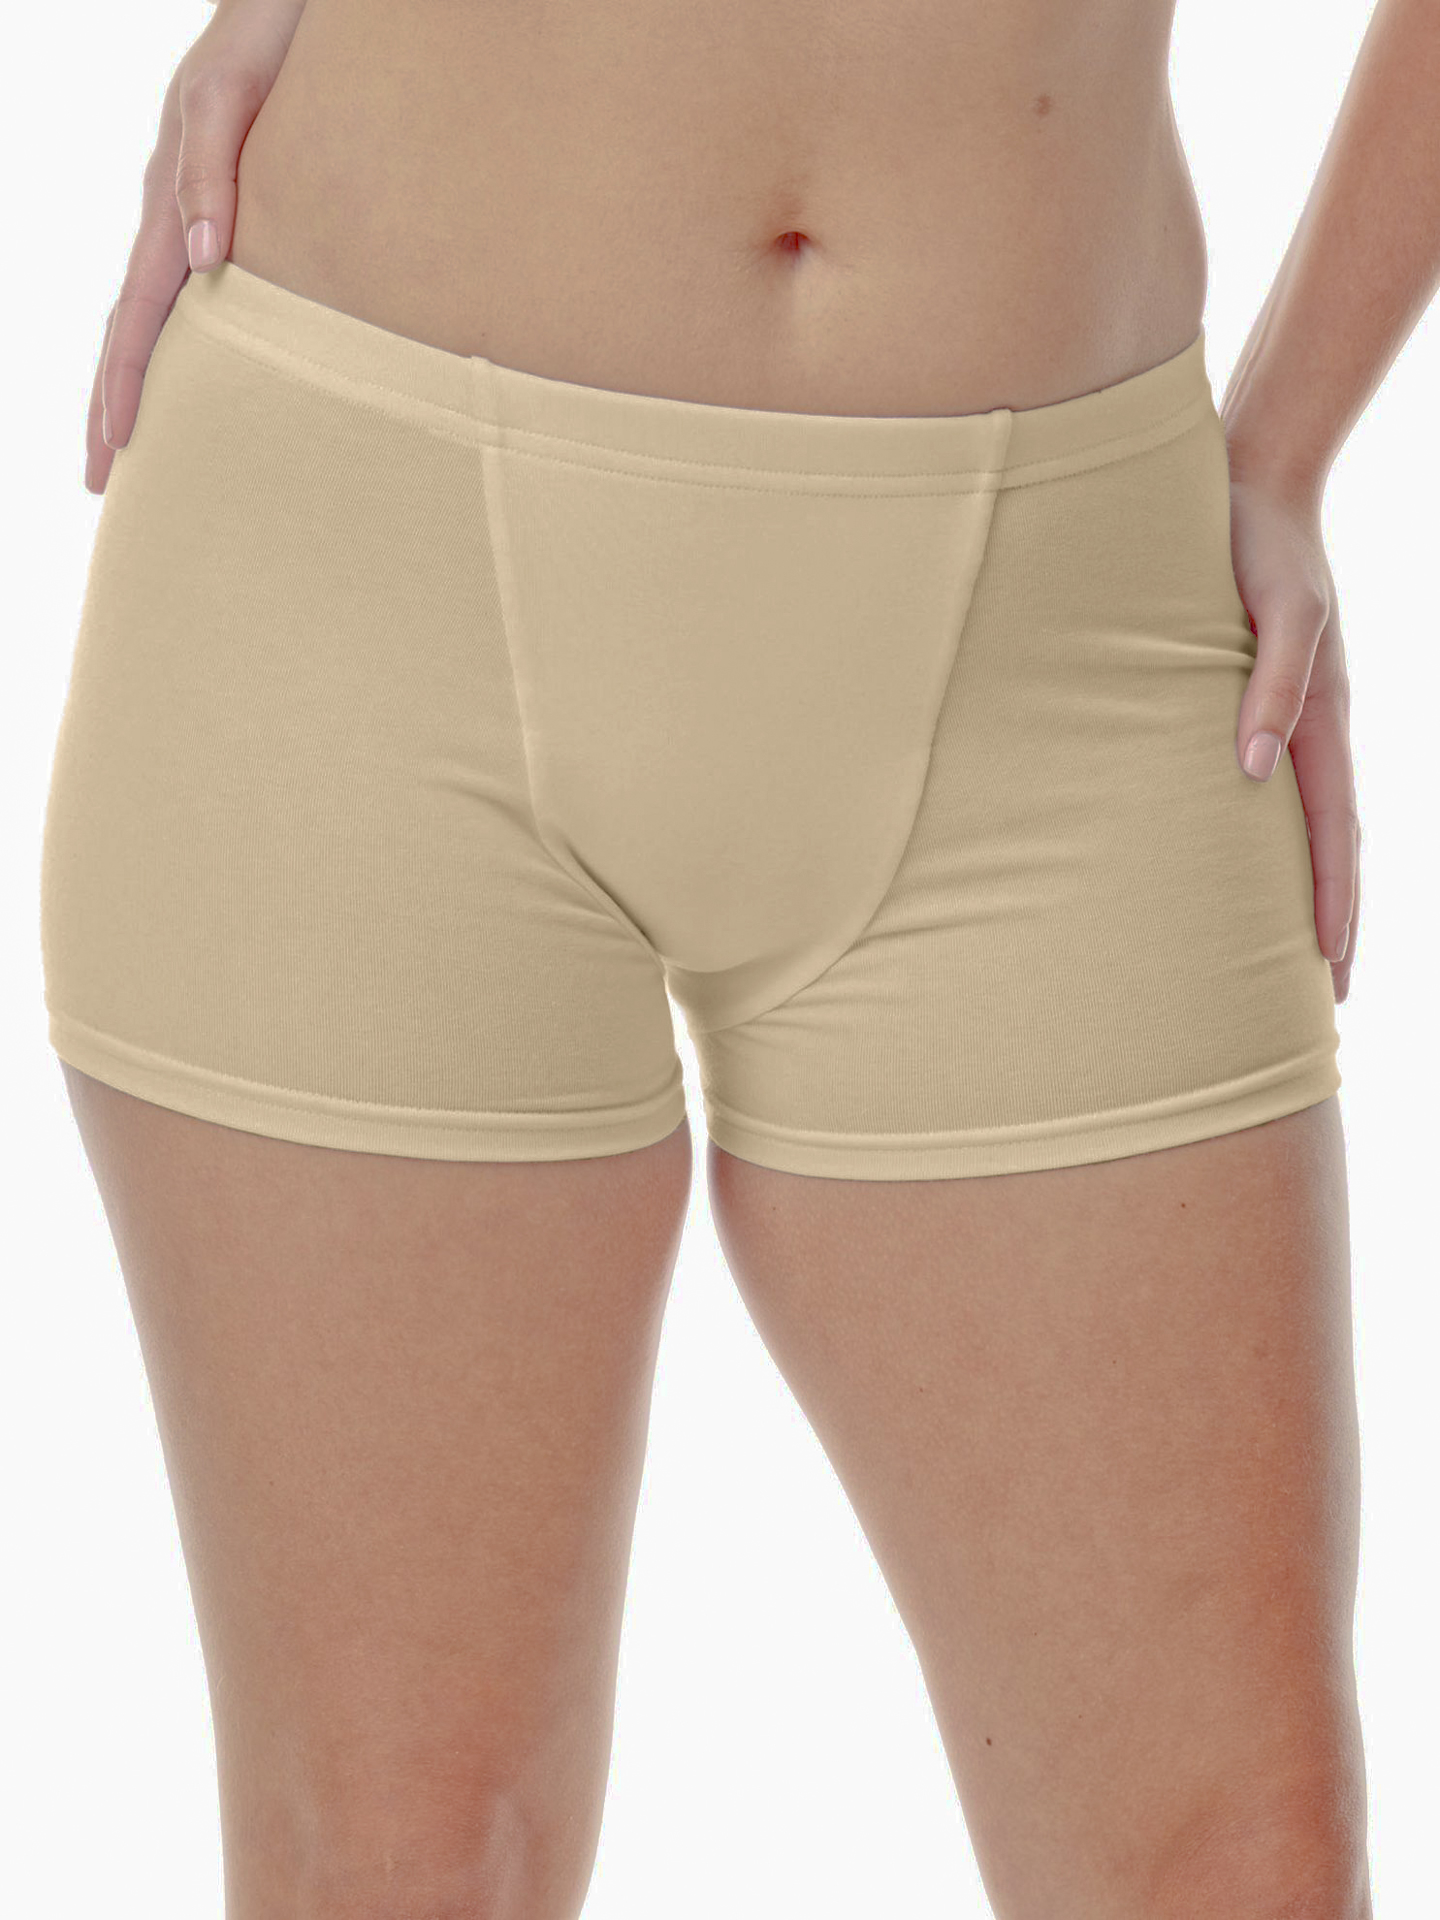 https://www.underworks.com/images/thumbs/0002270_vulvar-varicosity-and-prolapse-support-boy-leg-brief-with-groin-compression-bands.jpeg